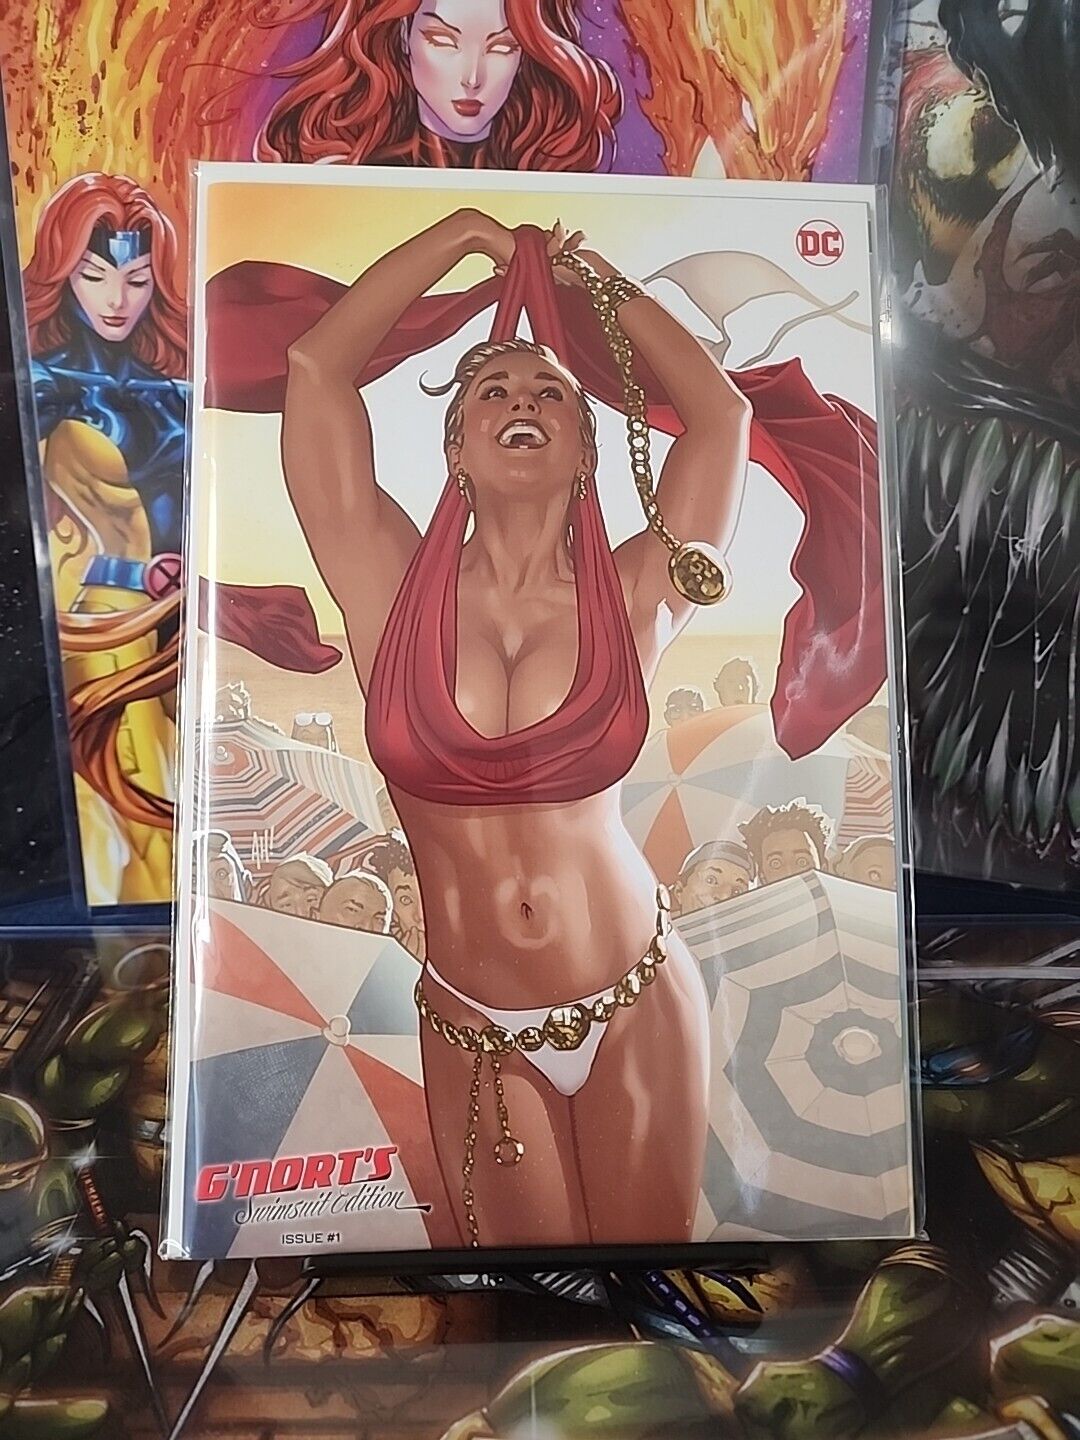 G’NORT’S ILLUSTRATED SWIMSUIT EDITION #1 ADAM HUGHES VARIANT * 9.8 potential